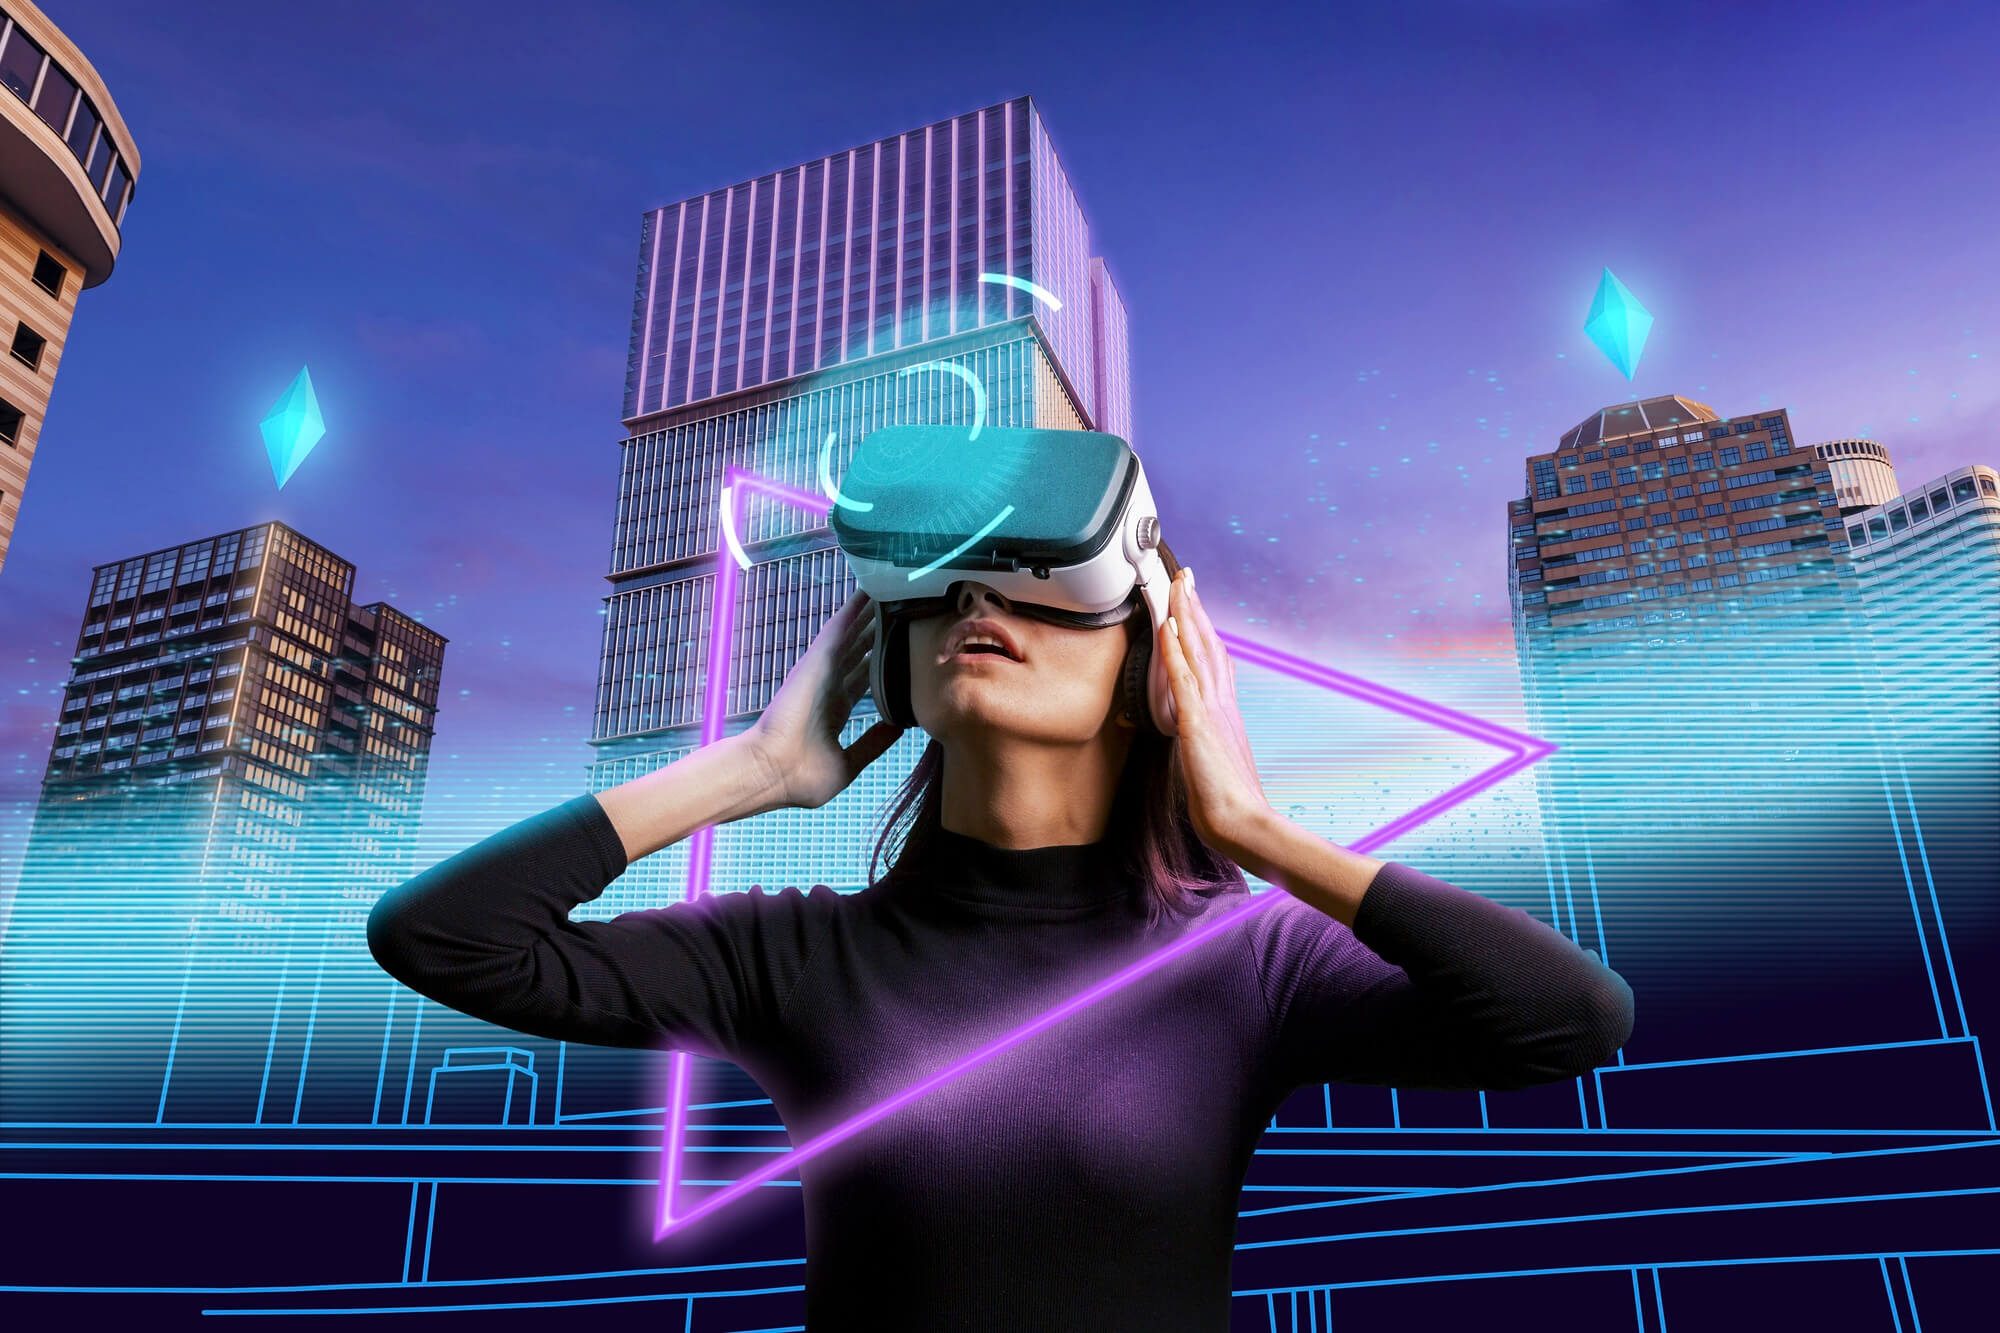 Future-proofing Investments Why Enterprises Should Consider Metaverse Real Estate Development